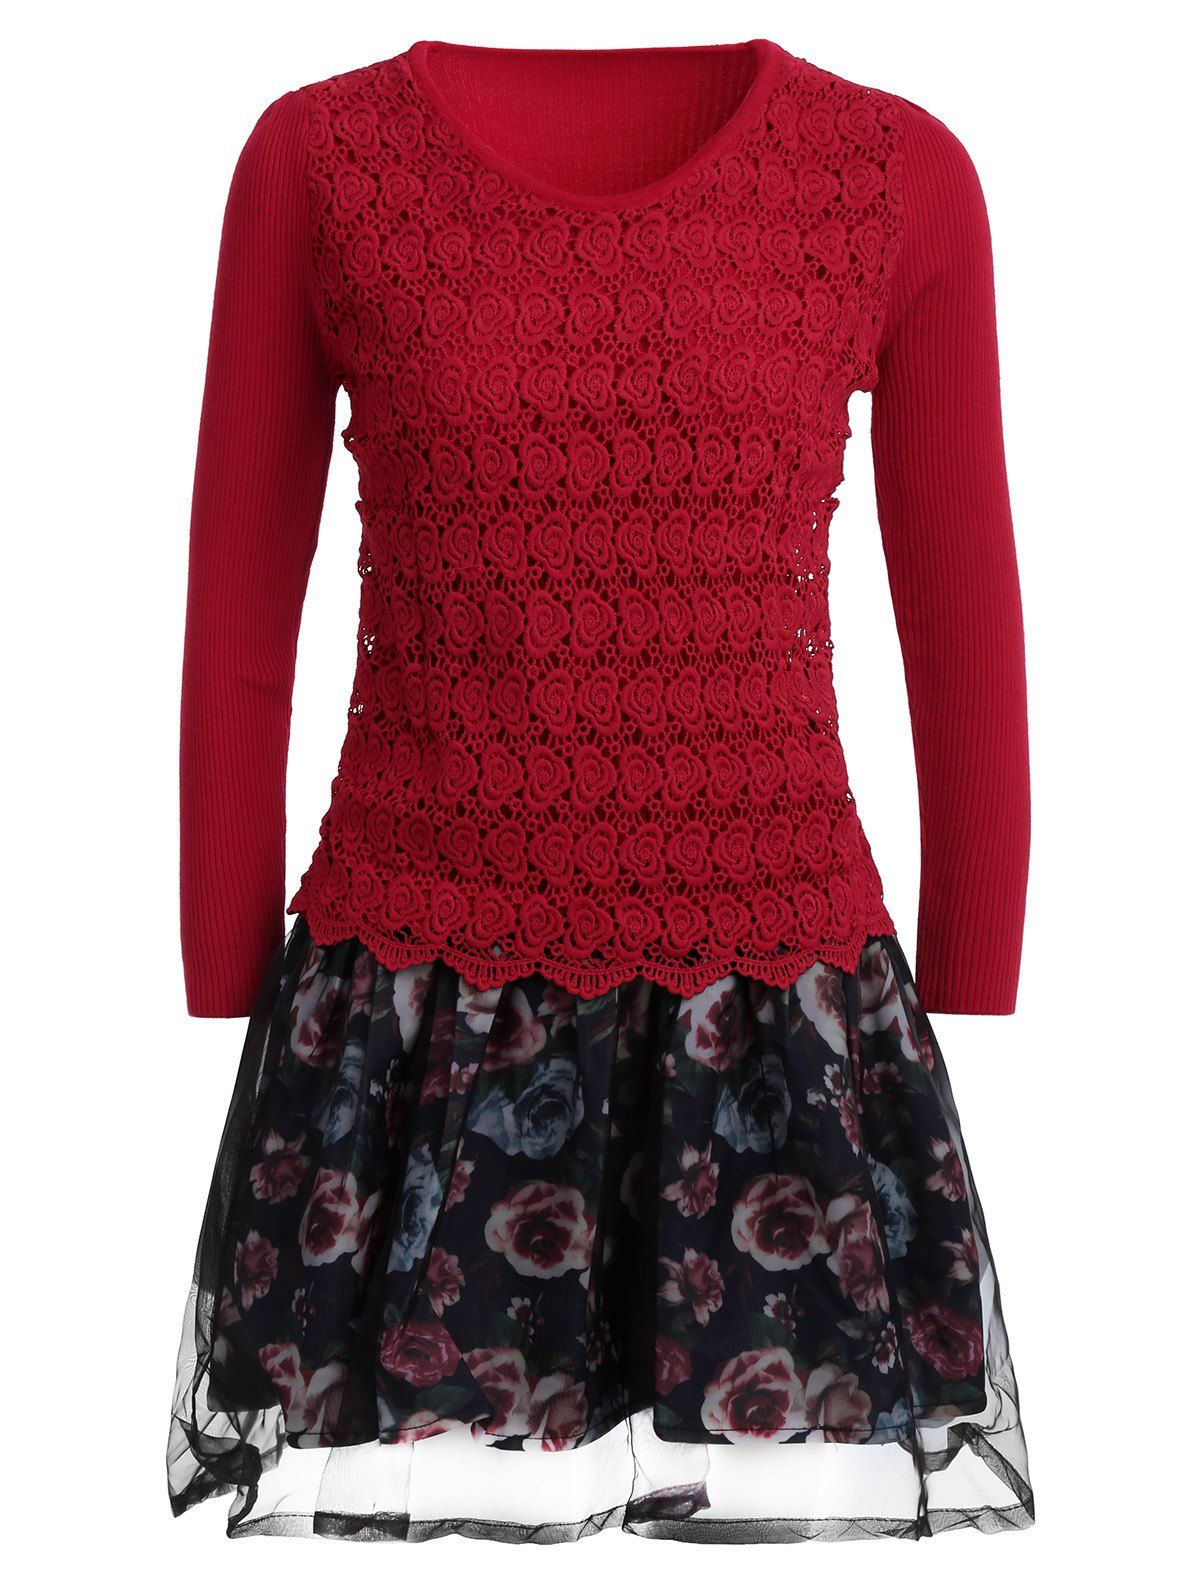 Chic Organza Spliced Floral Layered Sweater Skater Dress  